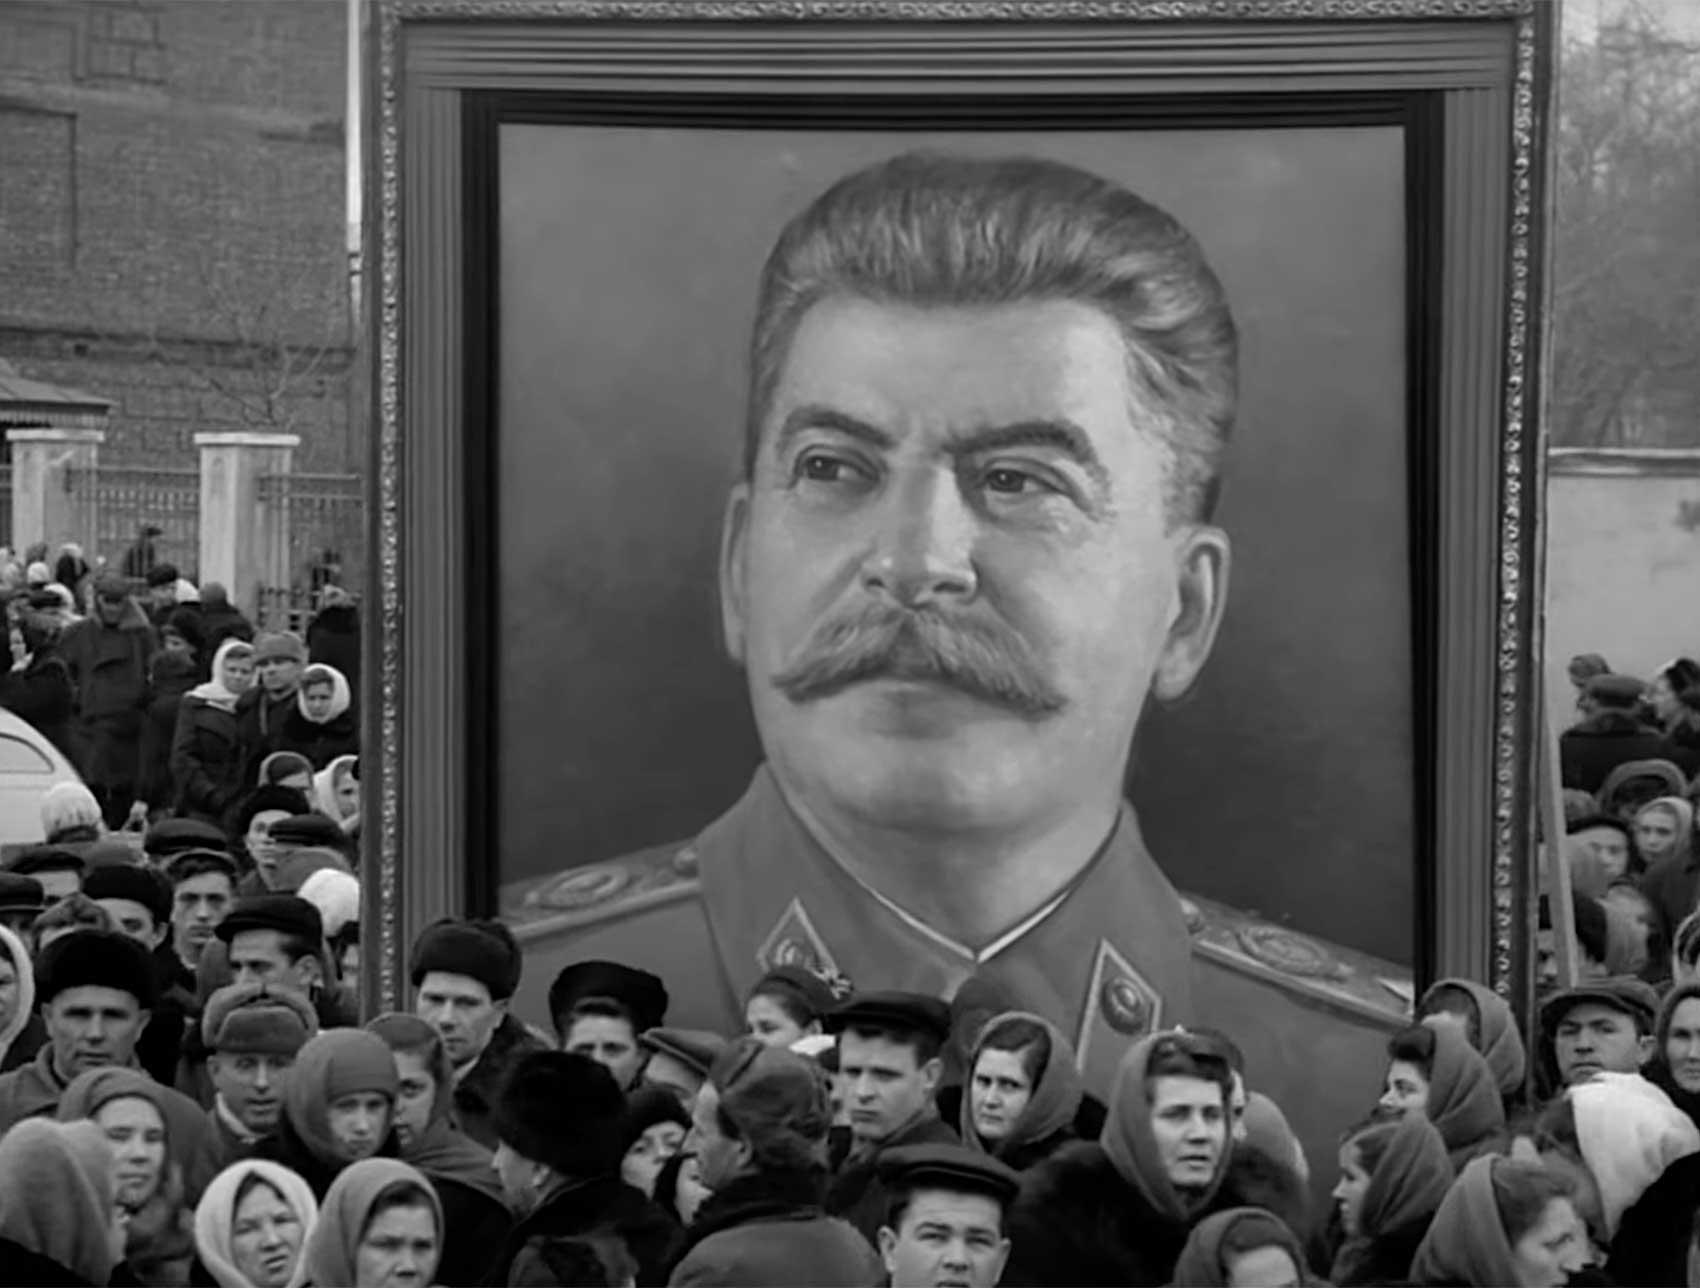 Large portrait of Stalin carried by crowds